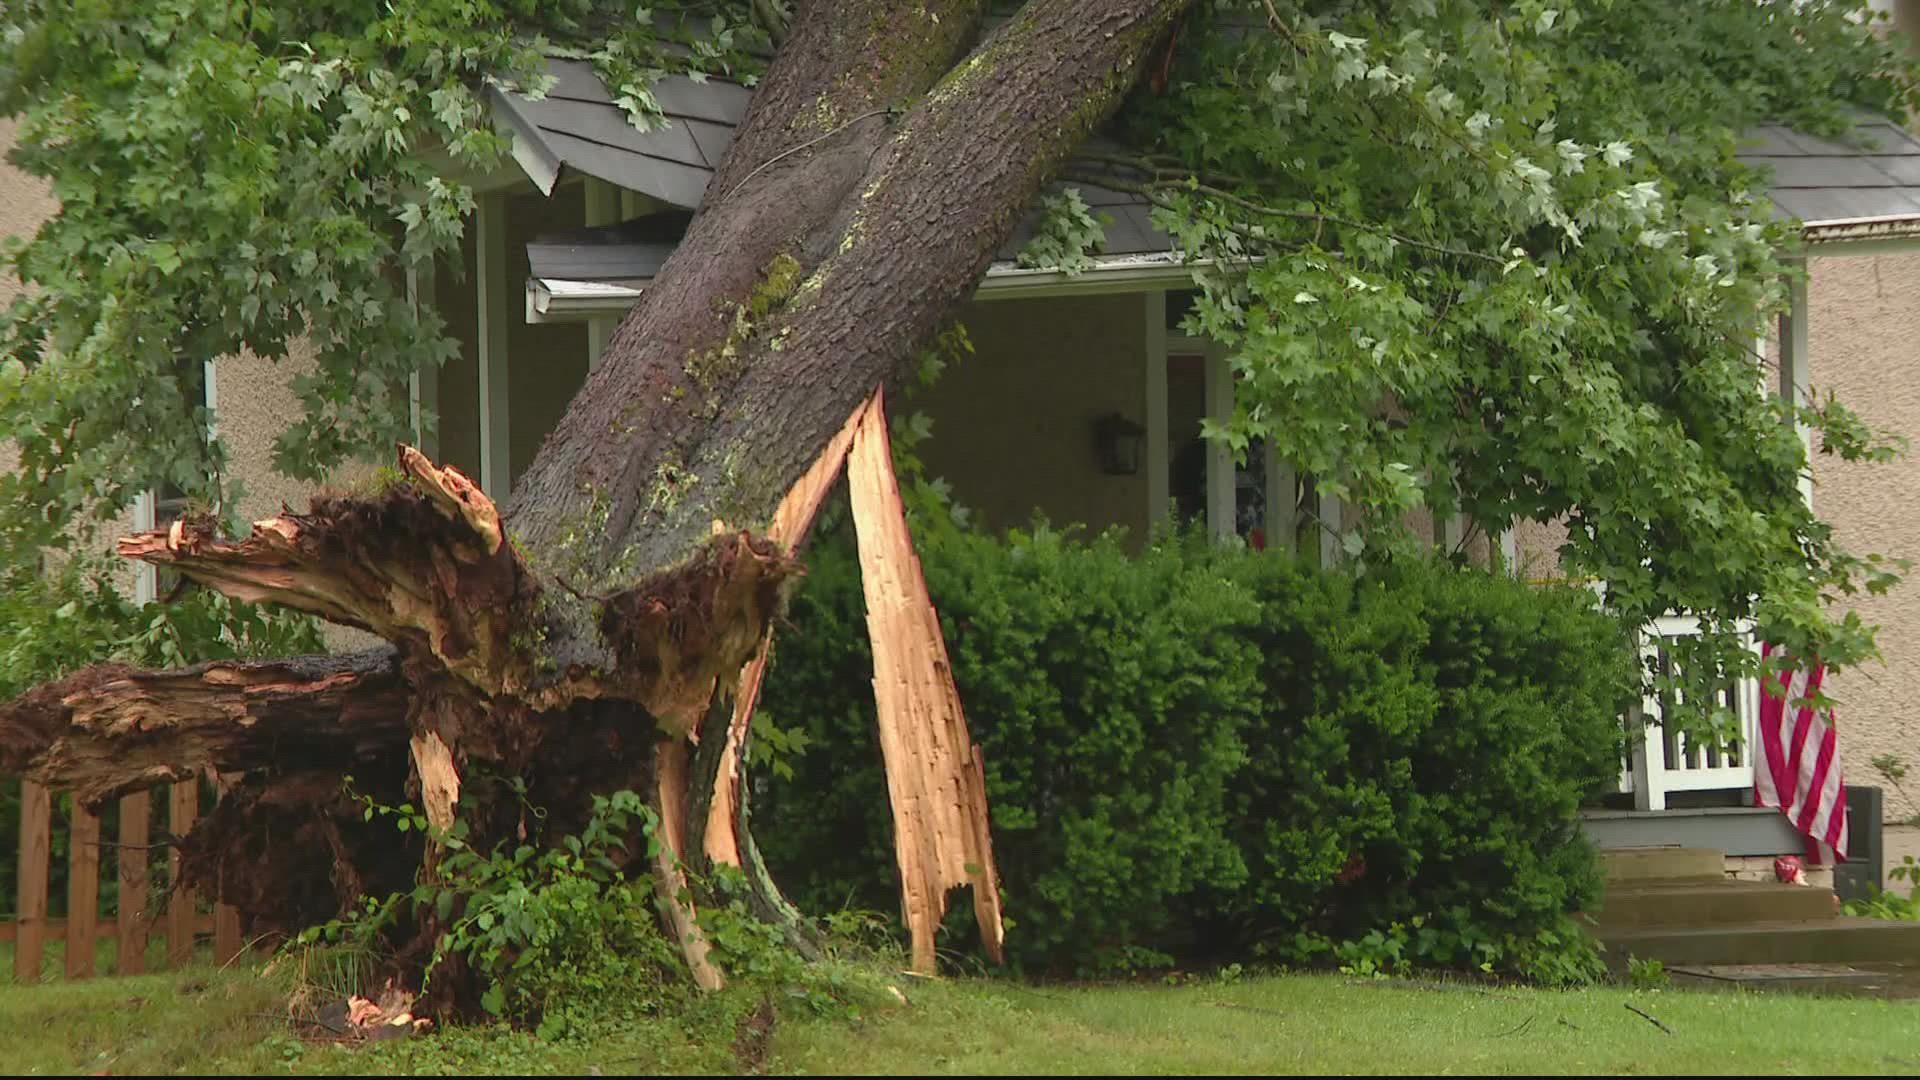 Despite strong winds and extensive damage, no one was injured, according to city leaders.